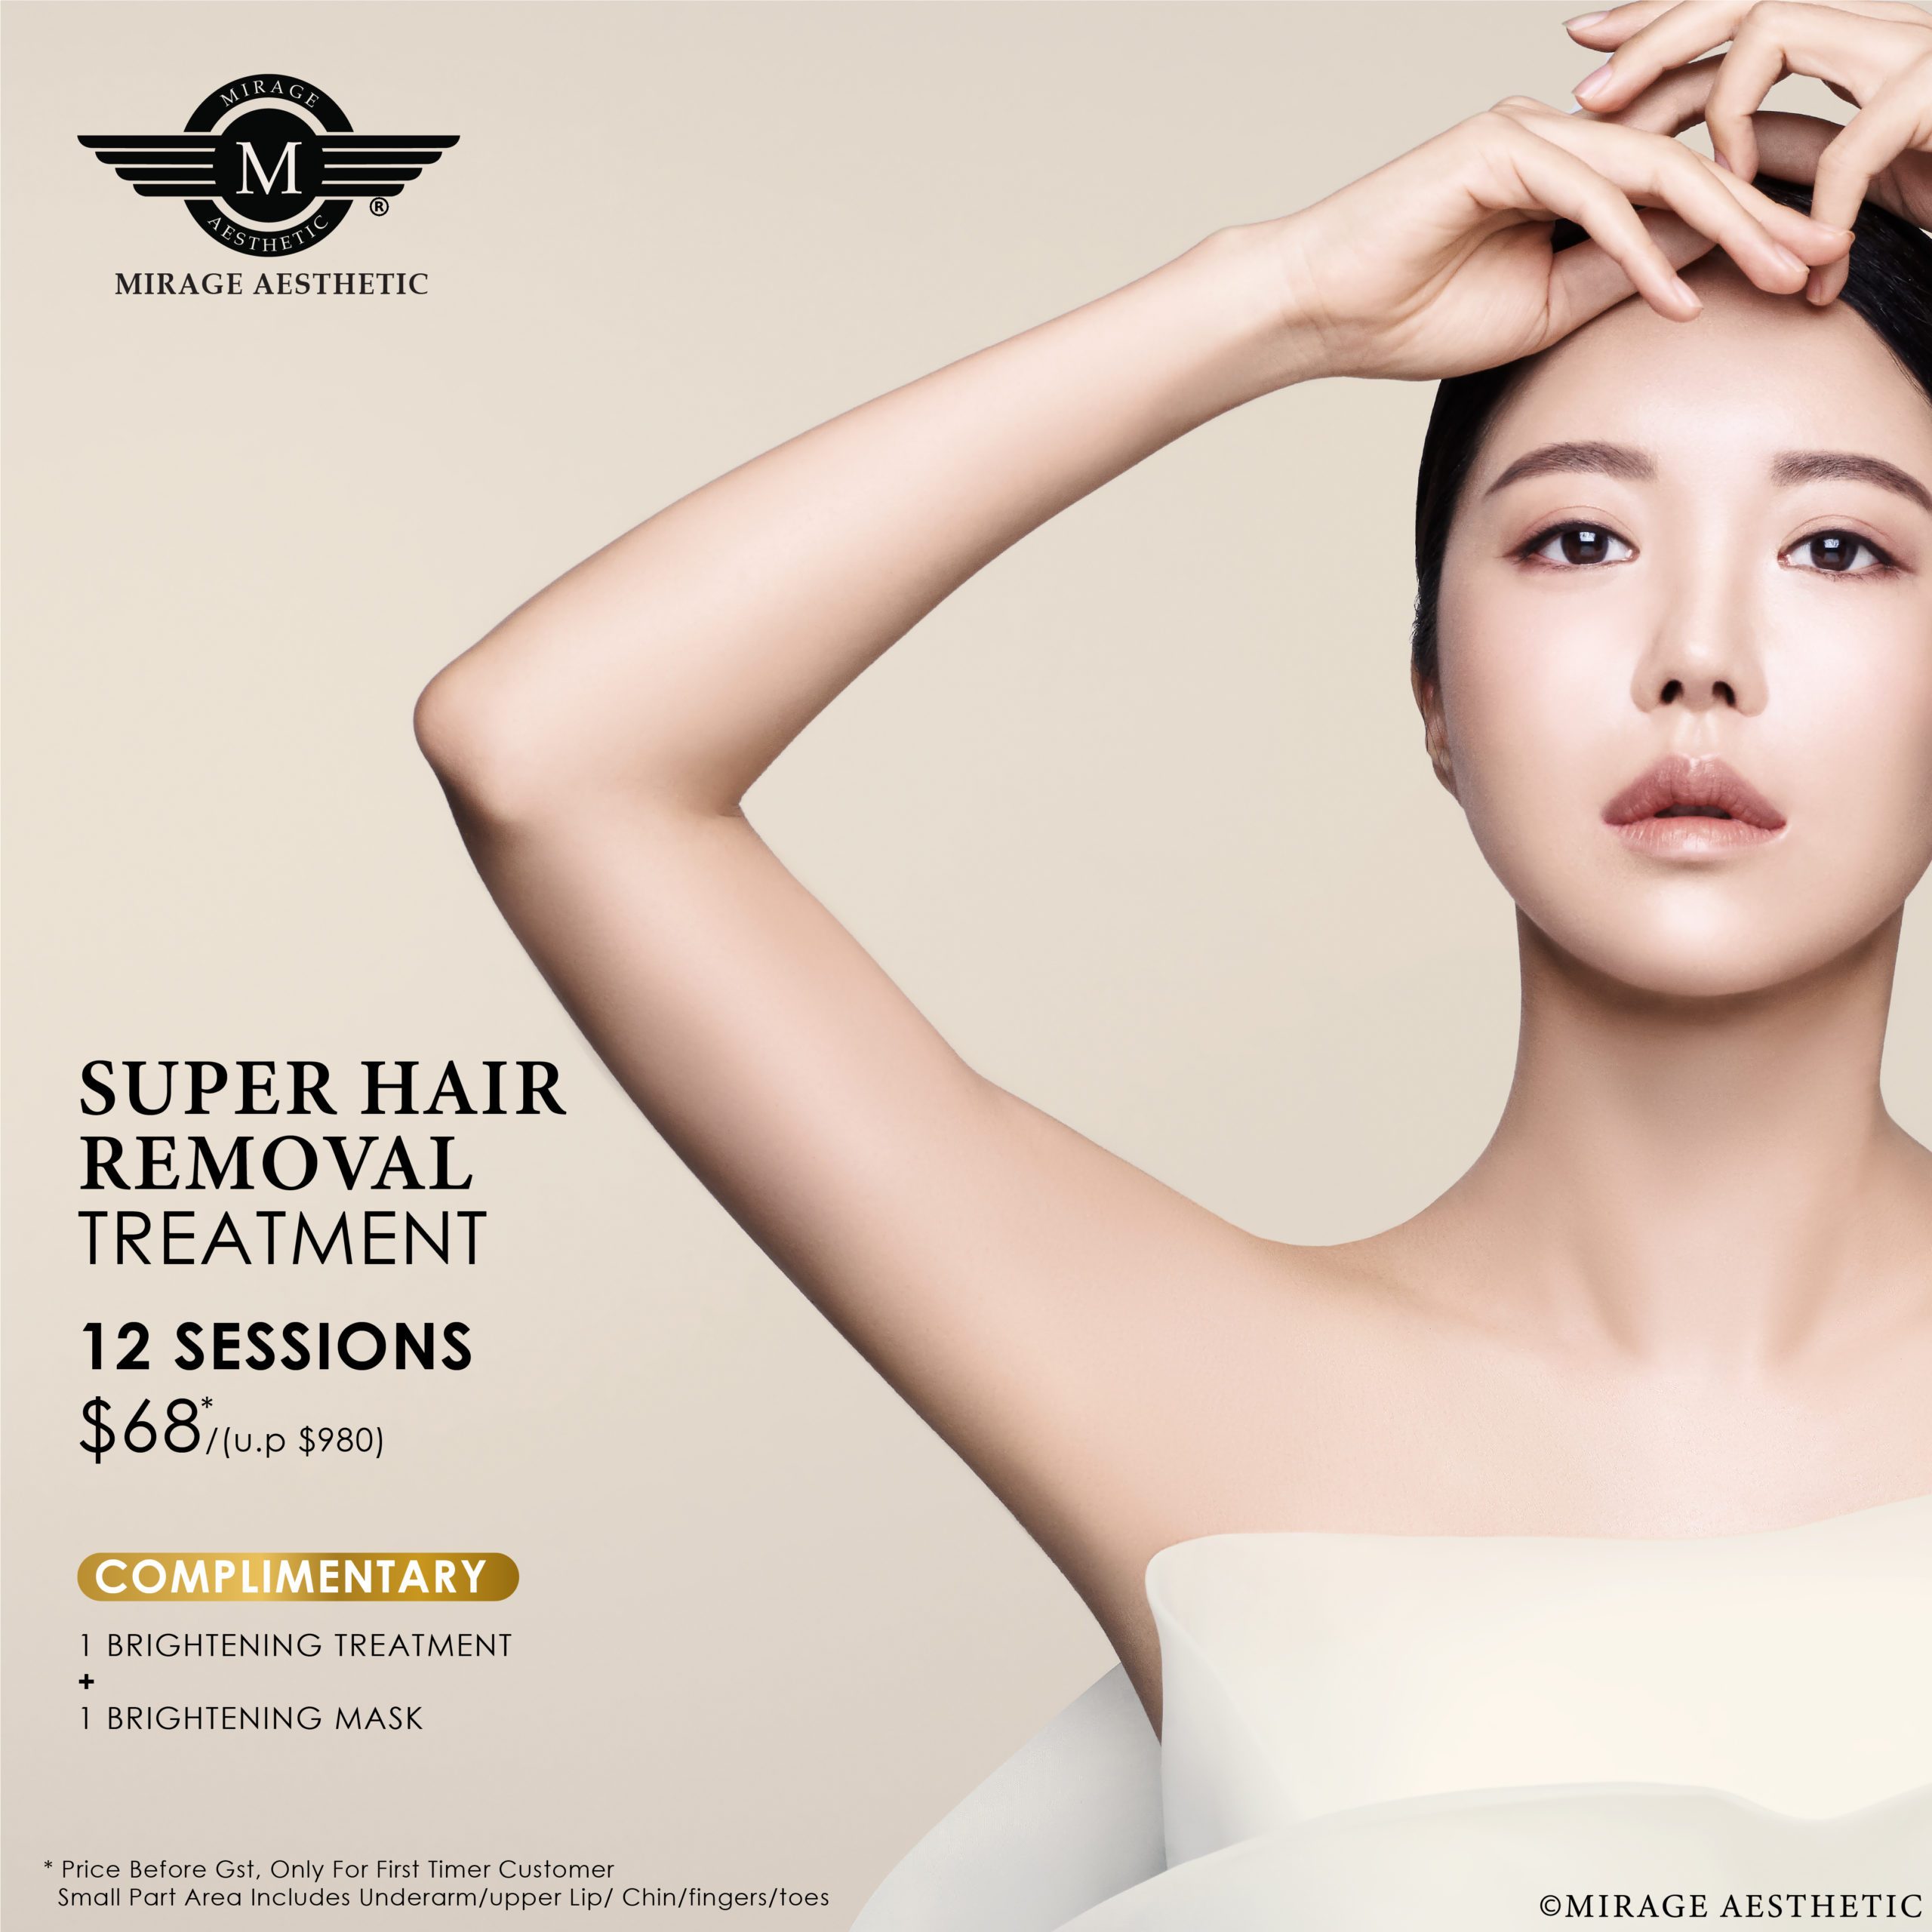 SUPER HAIR REMOVAL - Mirage Aesthetic